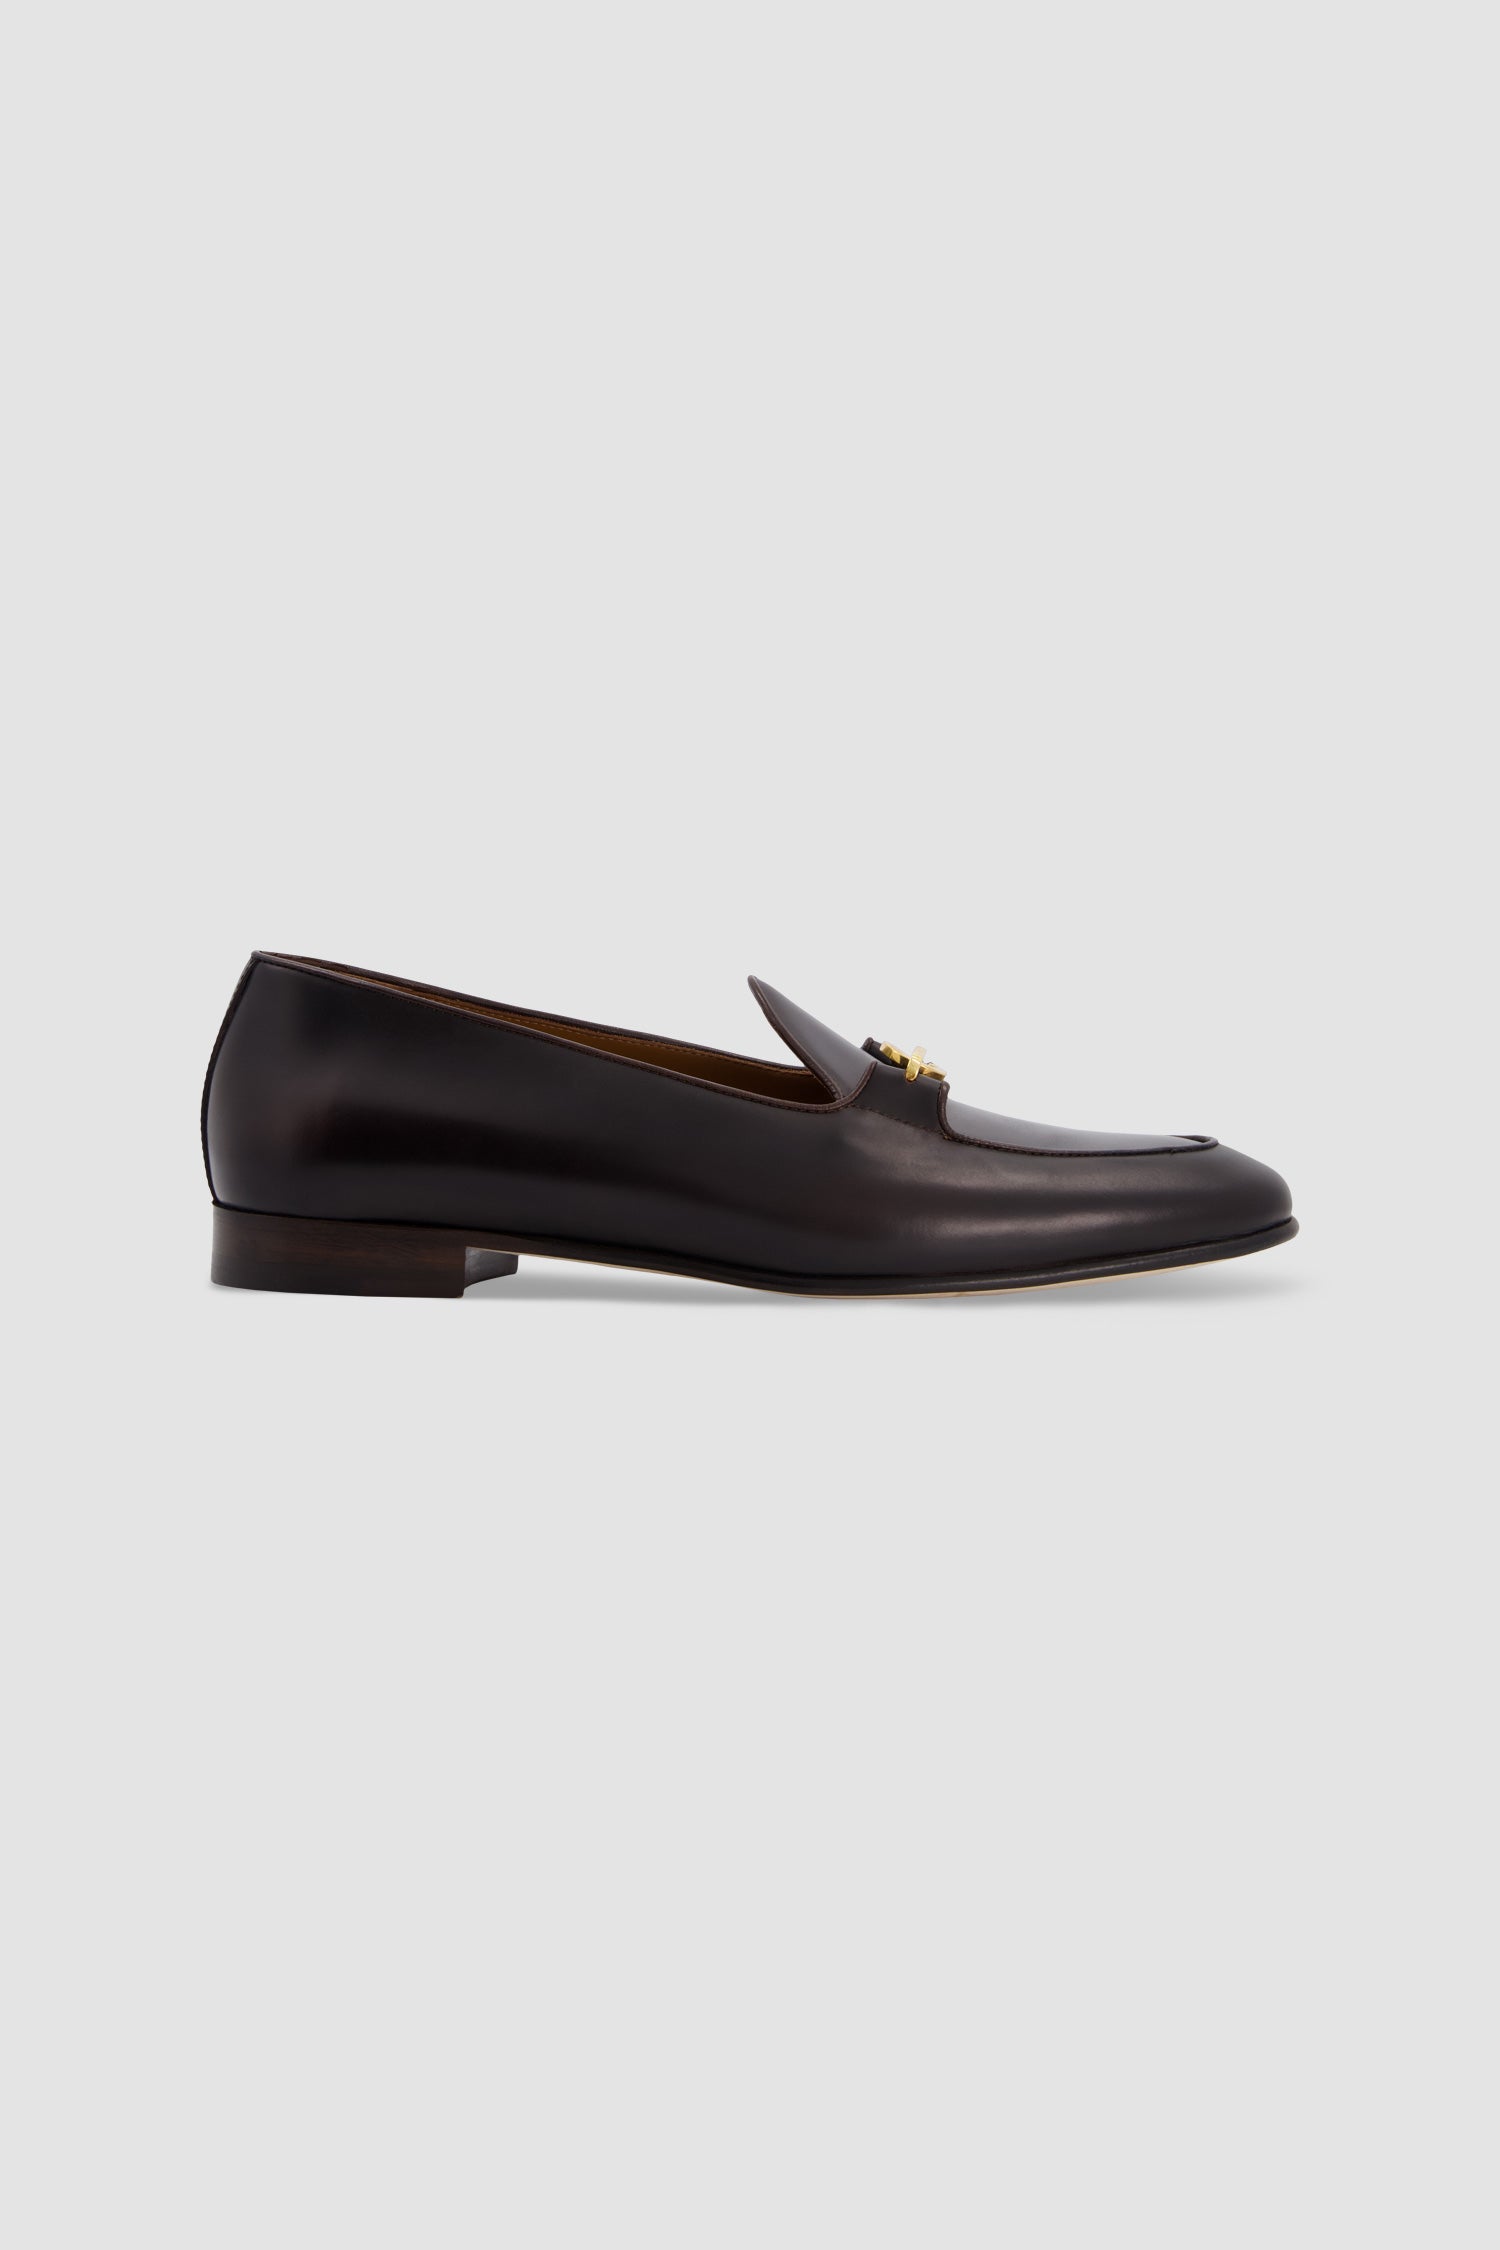 Edhen Milano Comporta Lock Brown Leather Loafers